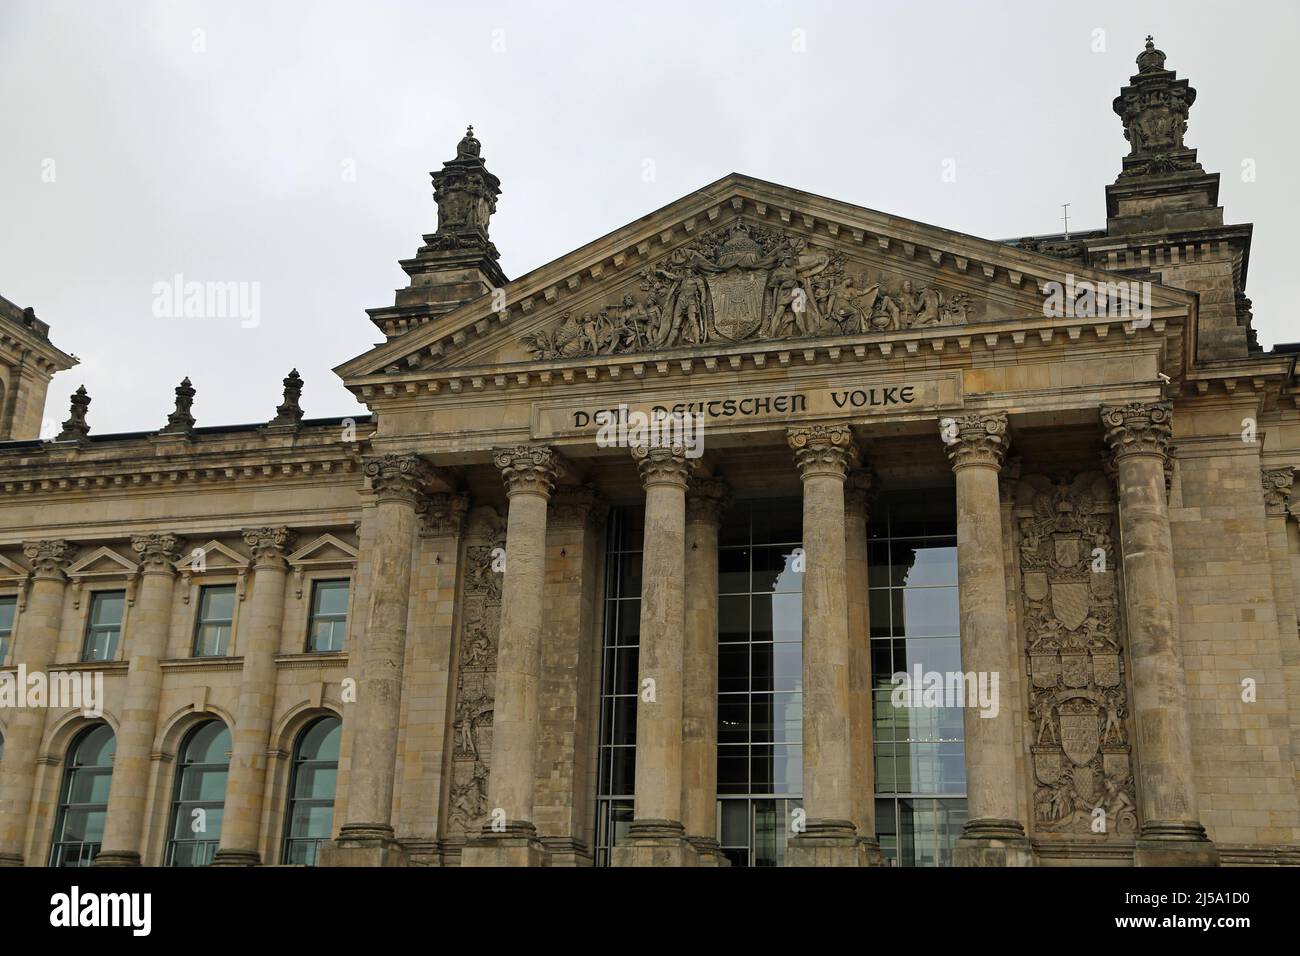 The front of the Reichstag - Berlin, Germany Stock Photo